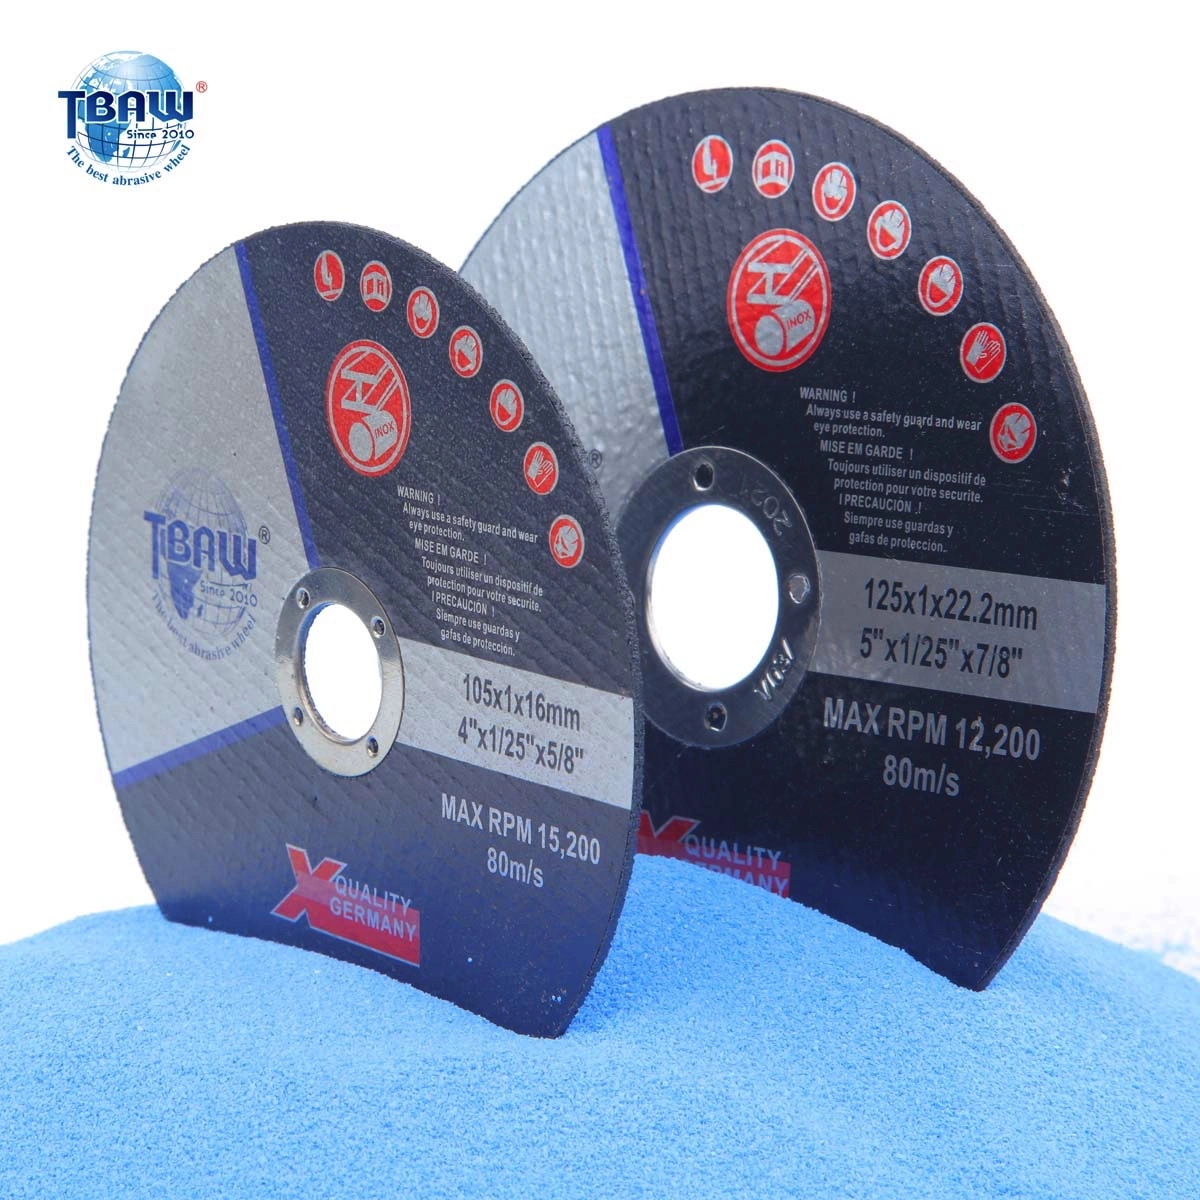 Types of Cutting Wheel 4 Inch Disc Grinder Abrasive Wheels for Stainless Steel 4 Inch Disc Grinding Disc China High 4 Inch Speed Cutting Disc Grinding Stone